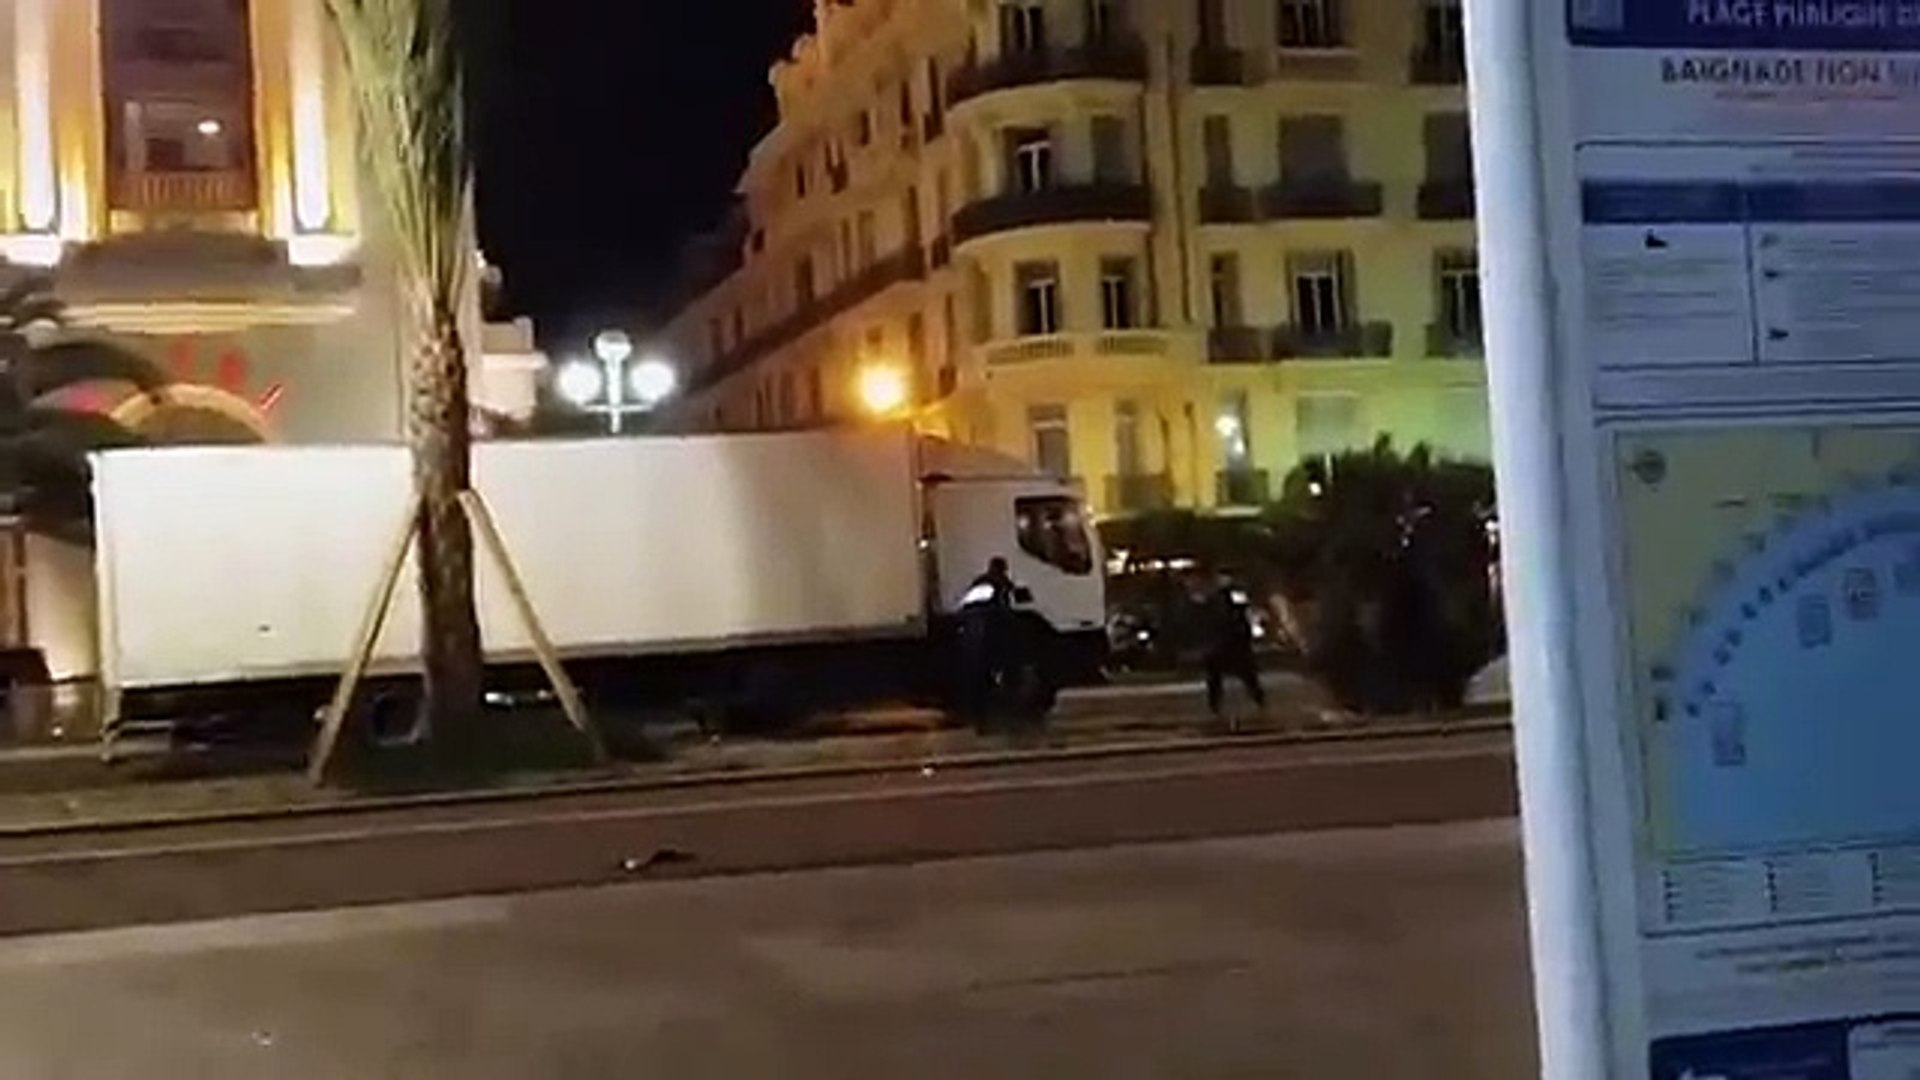 Latest News In Nice France